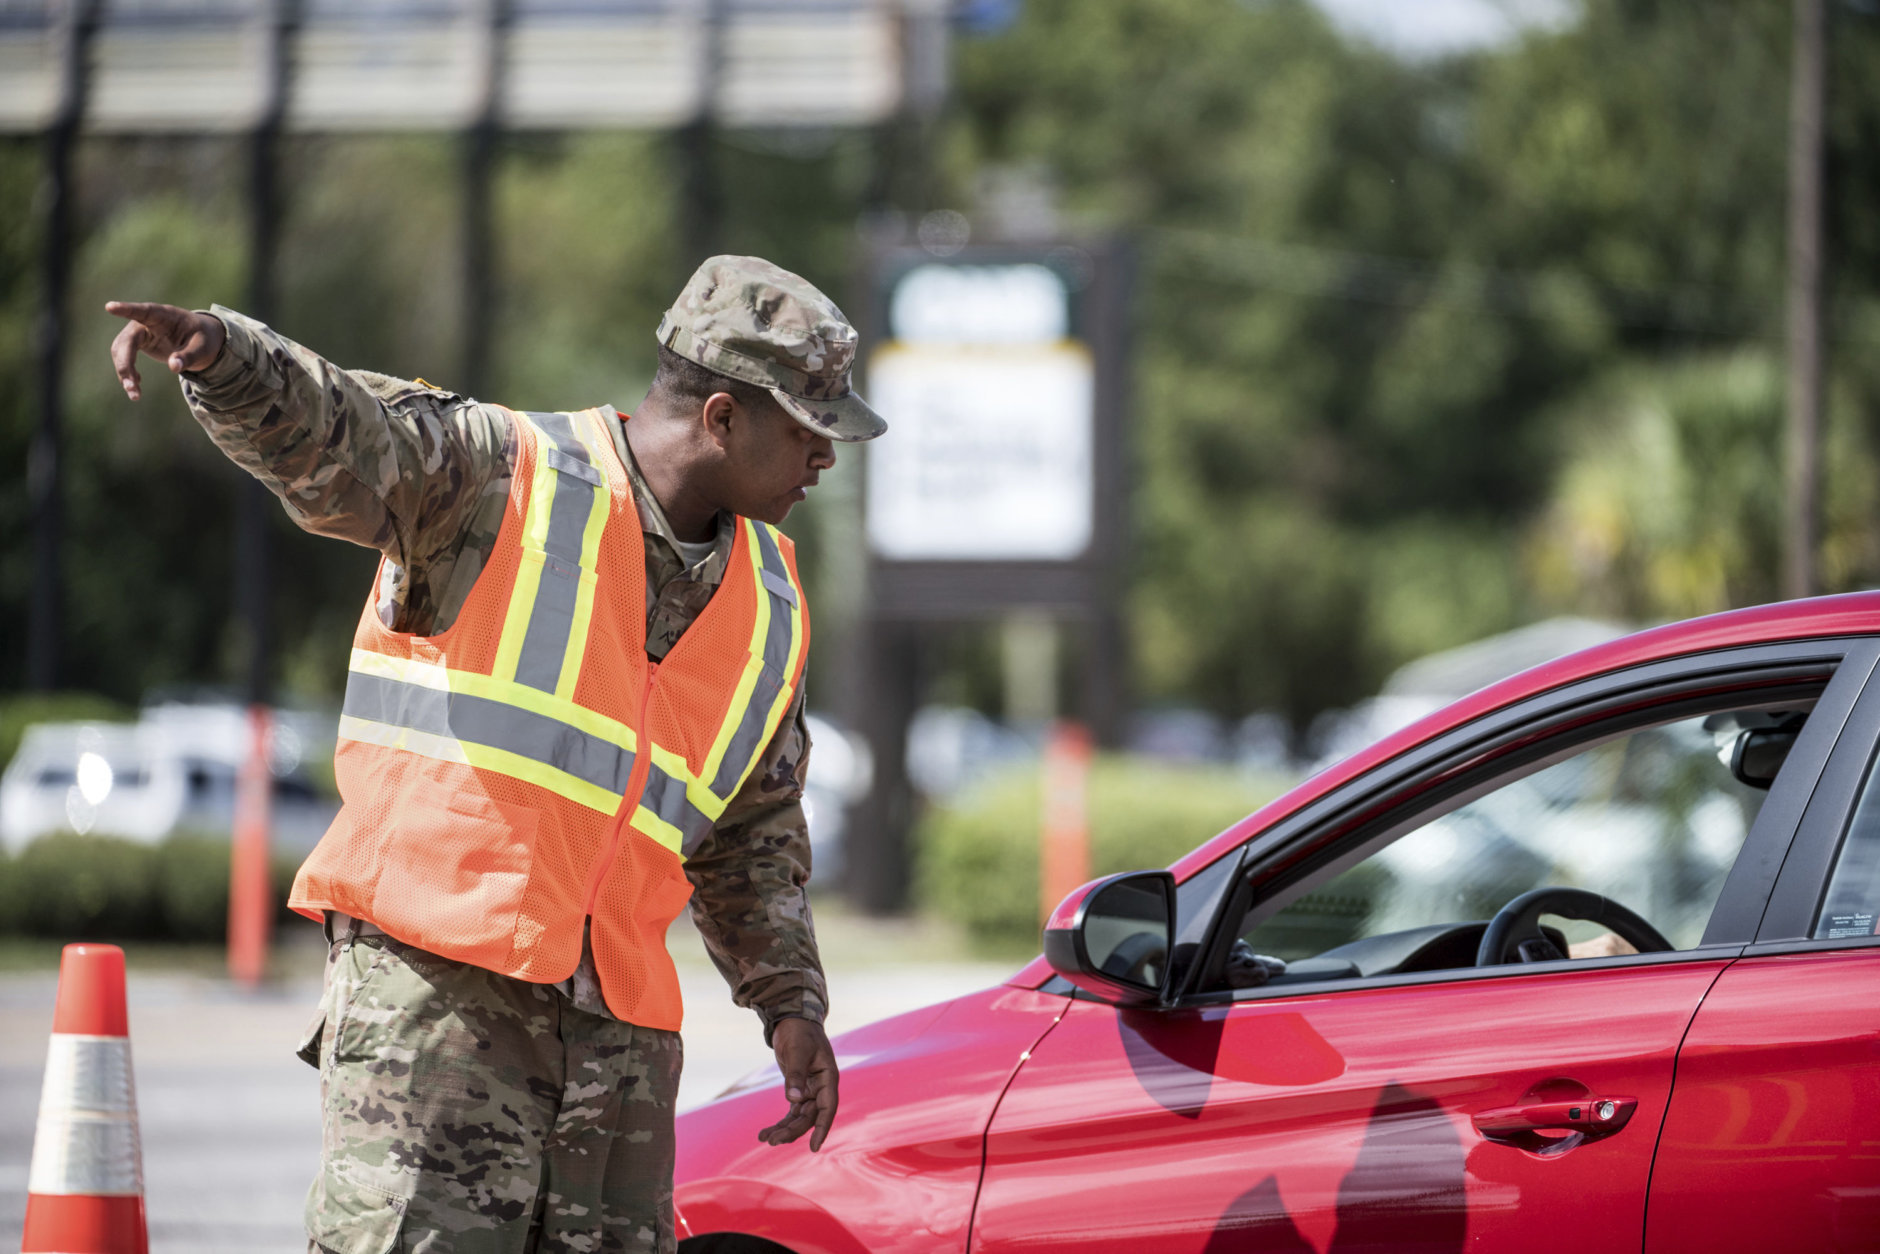 A National Guardsman directs traffic onto U.S. Highway 501 as Hurricane Florence approaches the East Coast Wednesday, Sept. 12, 2018, near Conway, S.C. Time is running short to get out of the way of Hurricane Florence, a monster of a storm that has a region of more than 10 million people in its potentially devastating sights. (AP Photo/Sean Rayford)